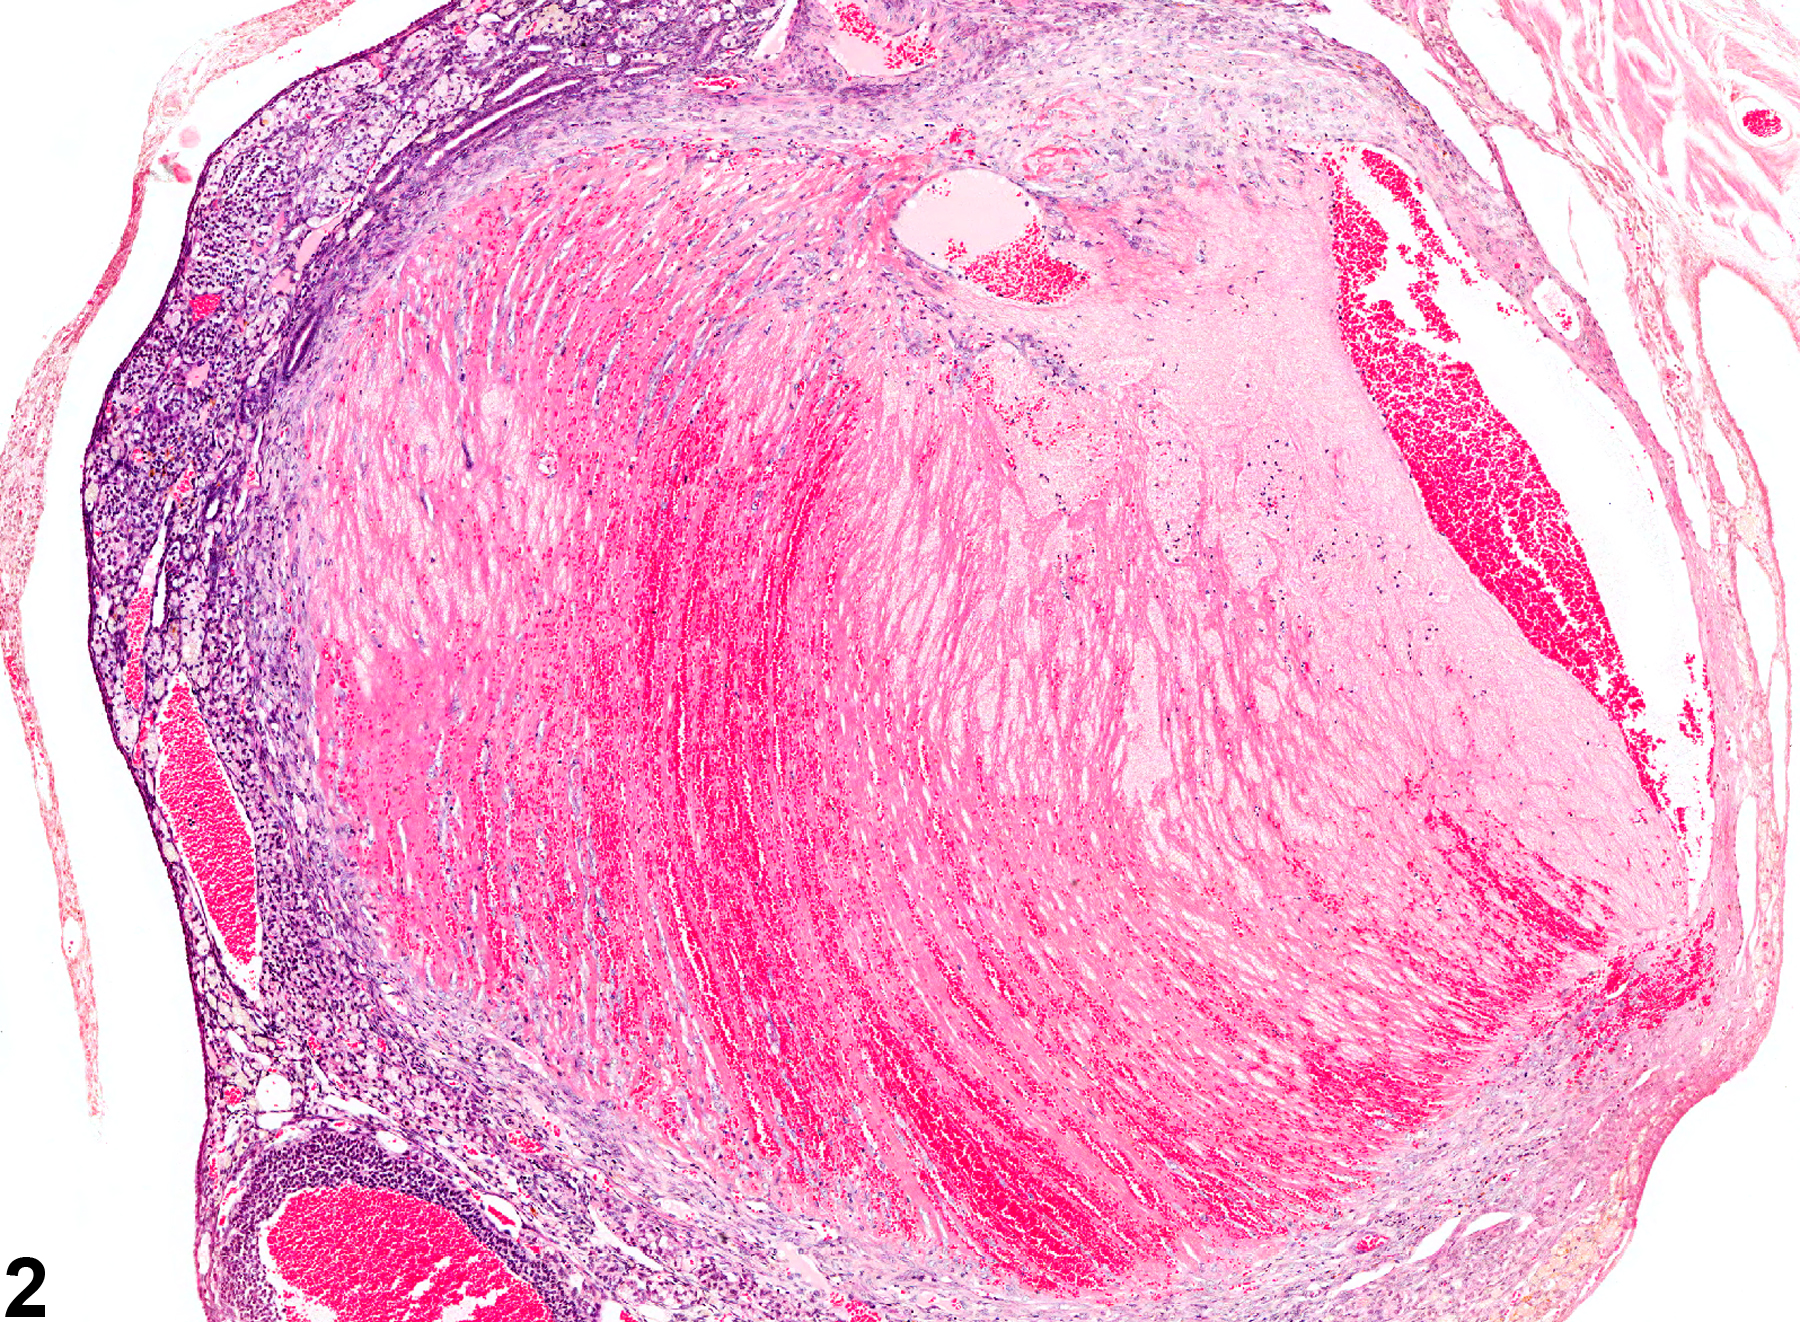 Image of thrombosis in the ovary from a female B6C3F1 mouse in a chronic study